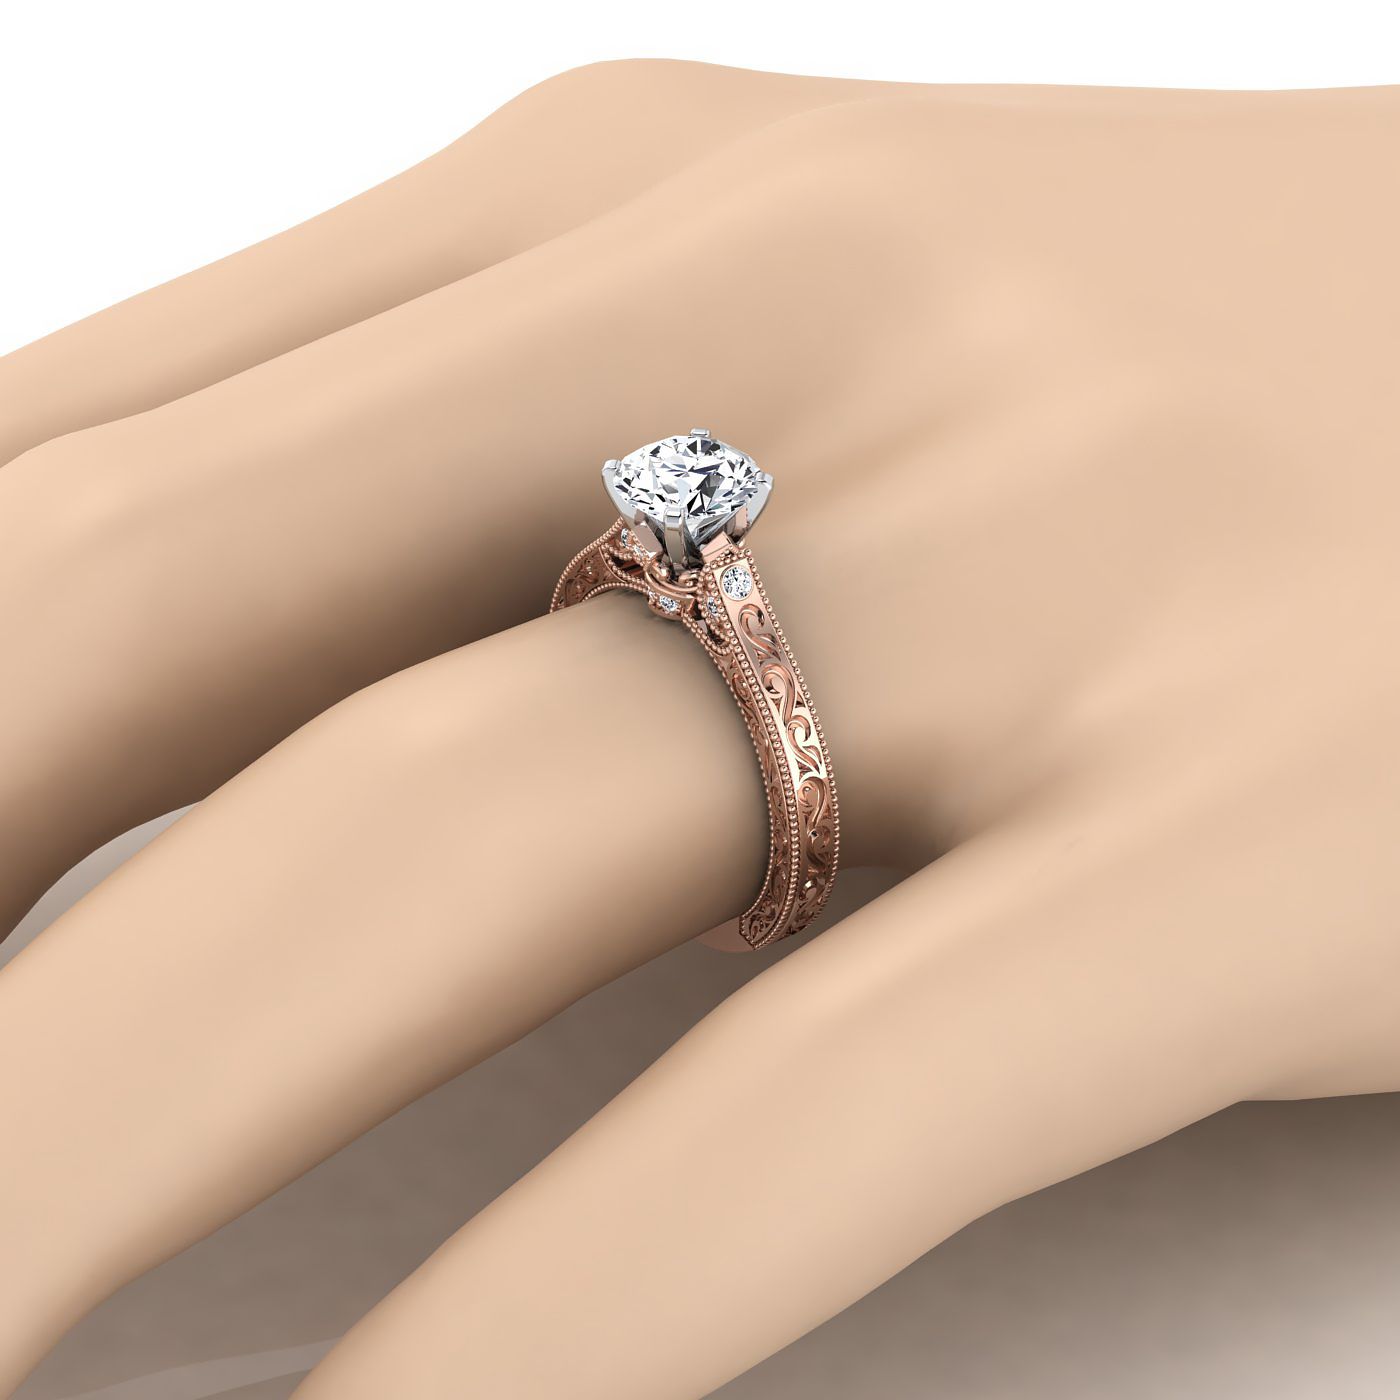 14K Rose Gold Round Brilliant Delicate Diamond Accented Antique Hand Engraved Engagement Ring -1/10ctw